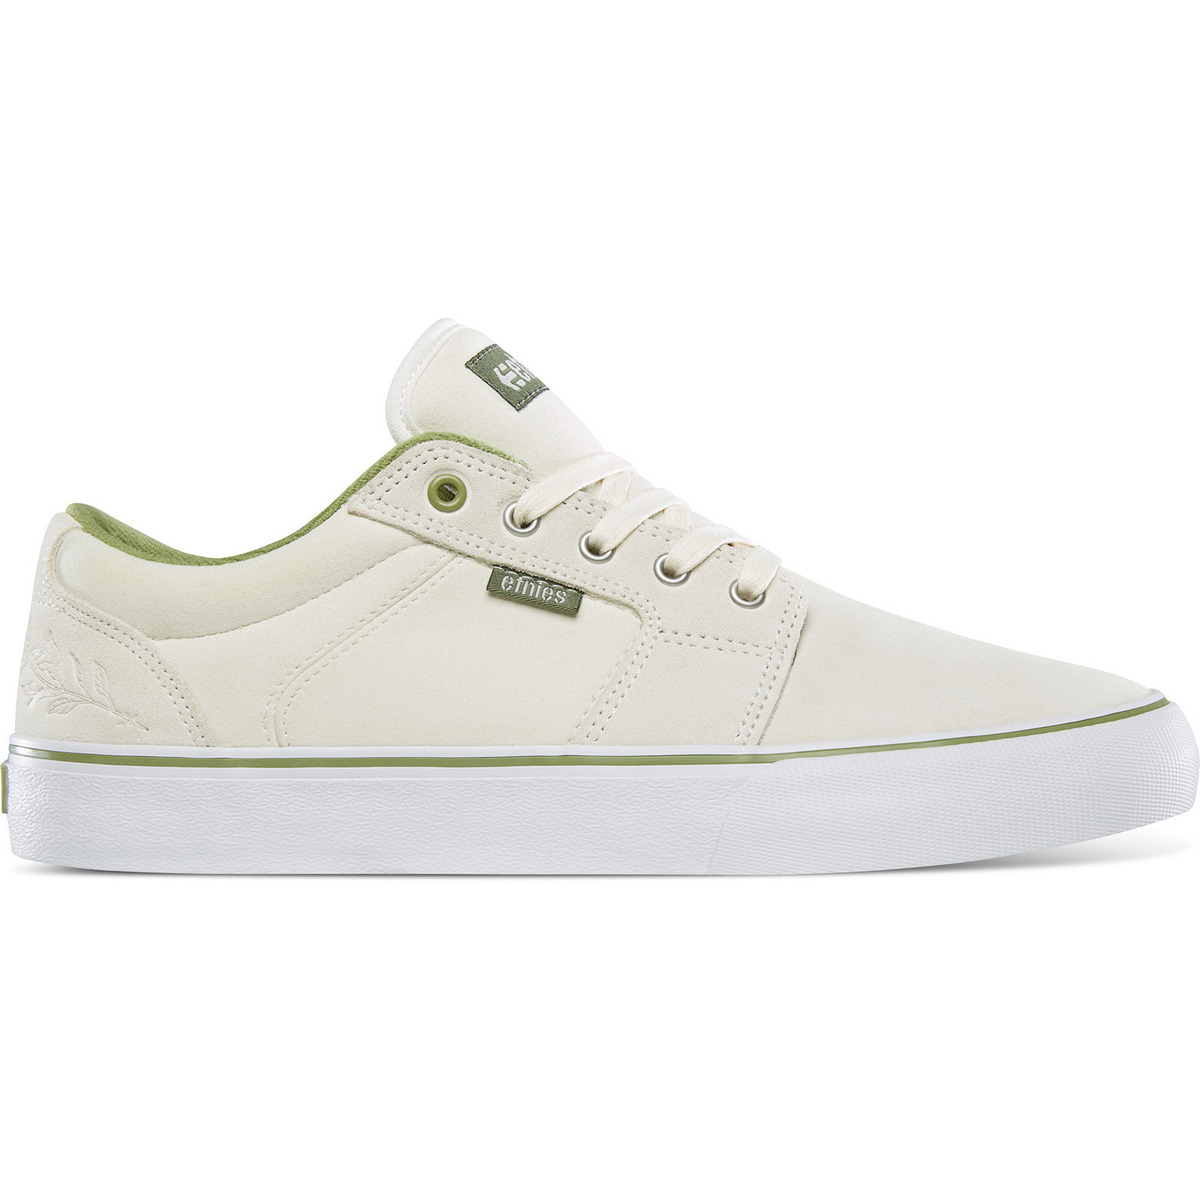 Chaussures Tables à manger Etnies BARGE LS WHITE GREEN 